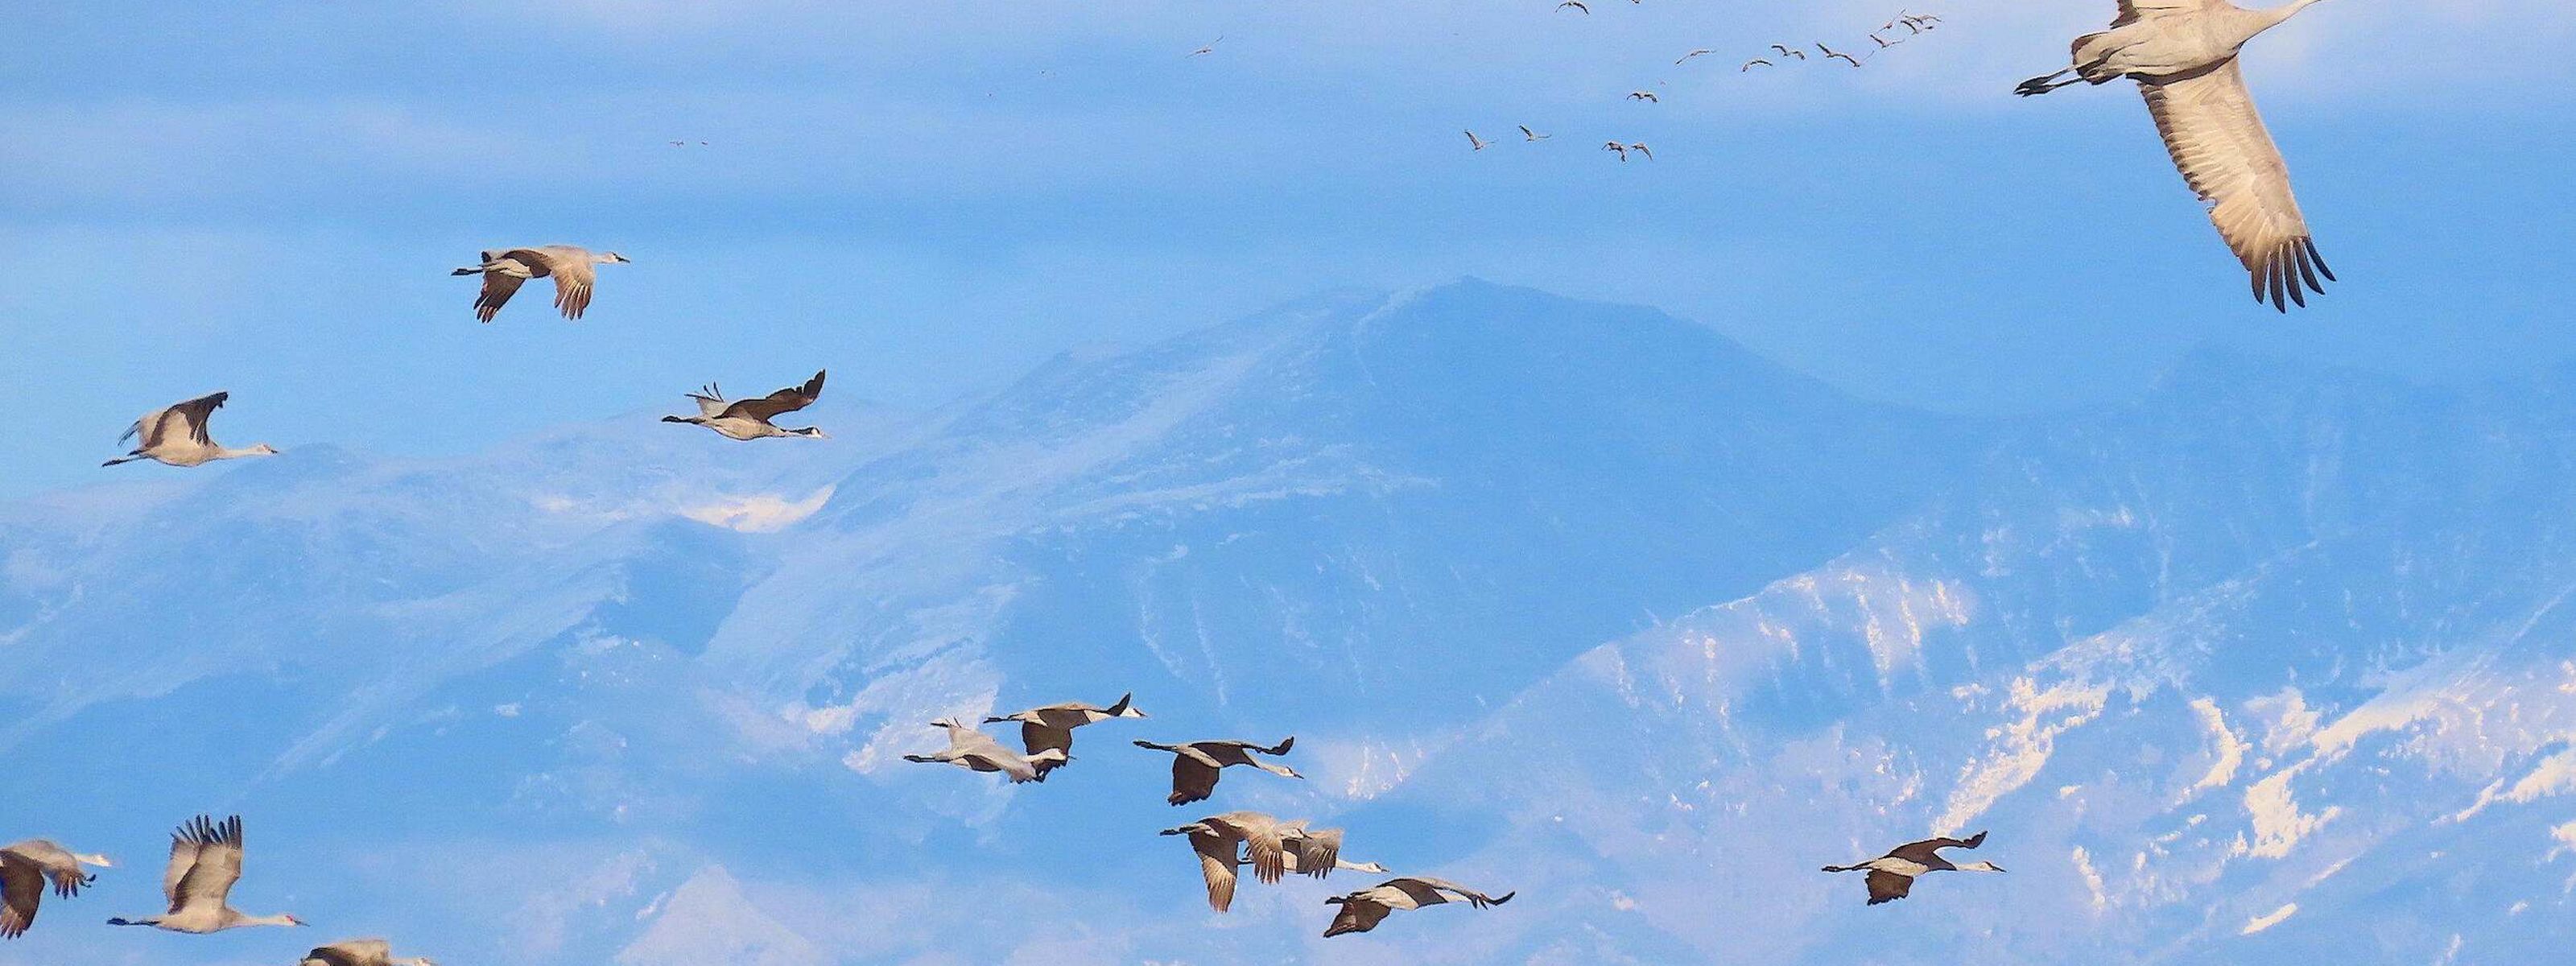 Sandhill cranes flying in the sky with blue snowcapped mountains in the background.